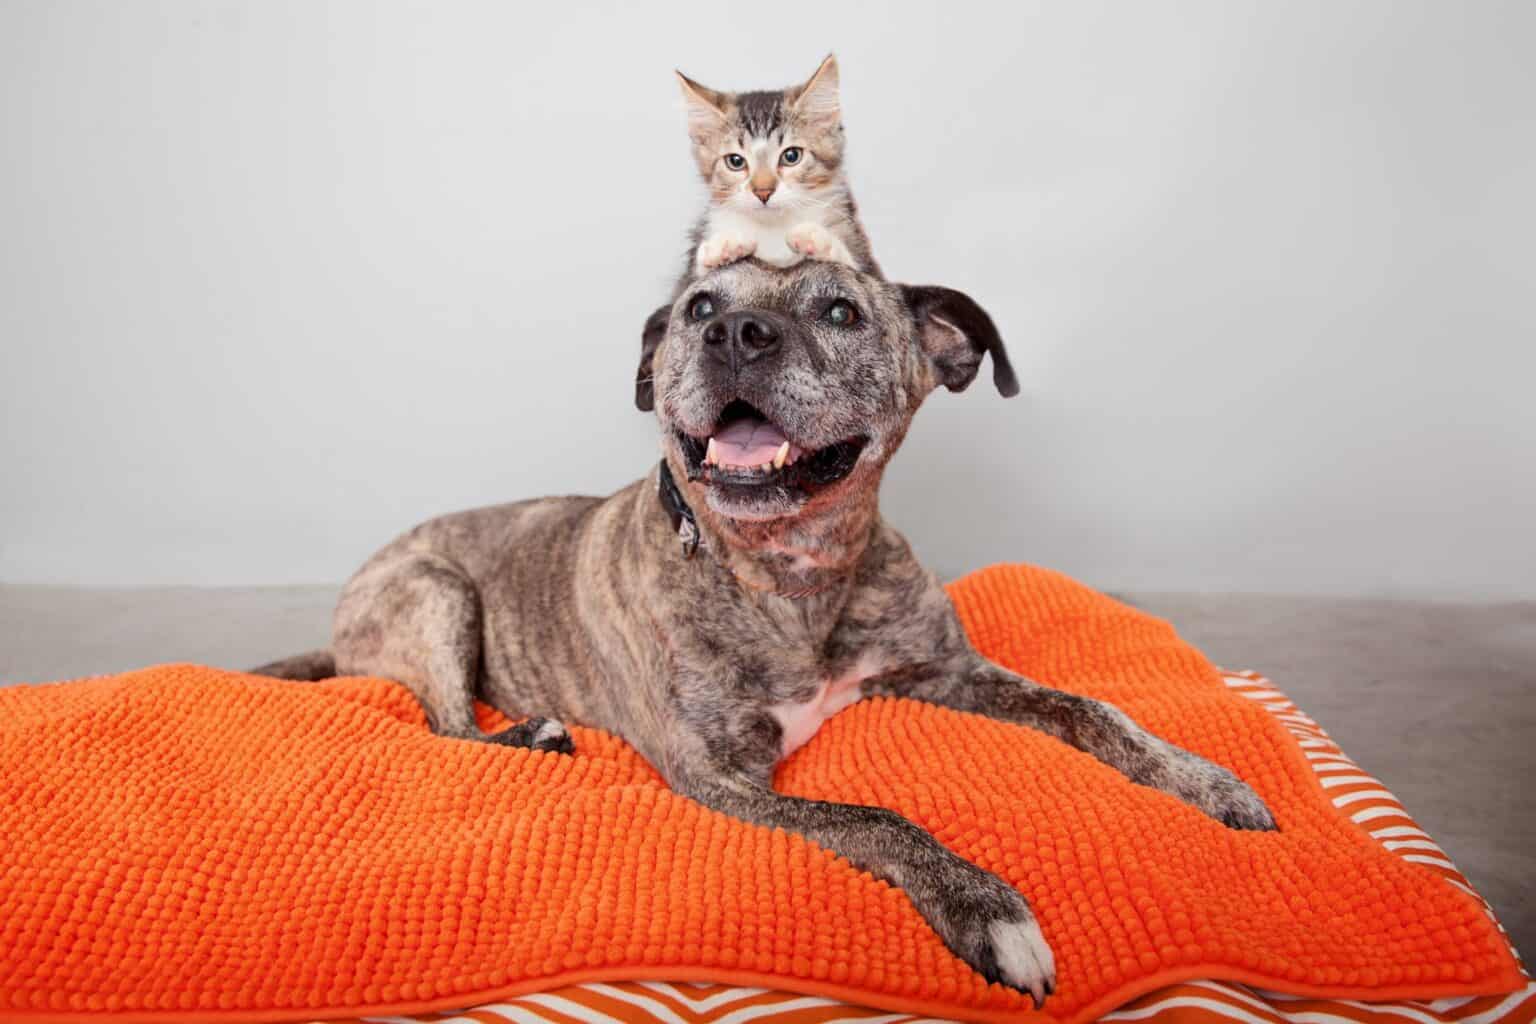 Brindle pit bull dog wiht cat on her head lays on a puffy orange bed and smiles into camera